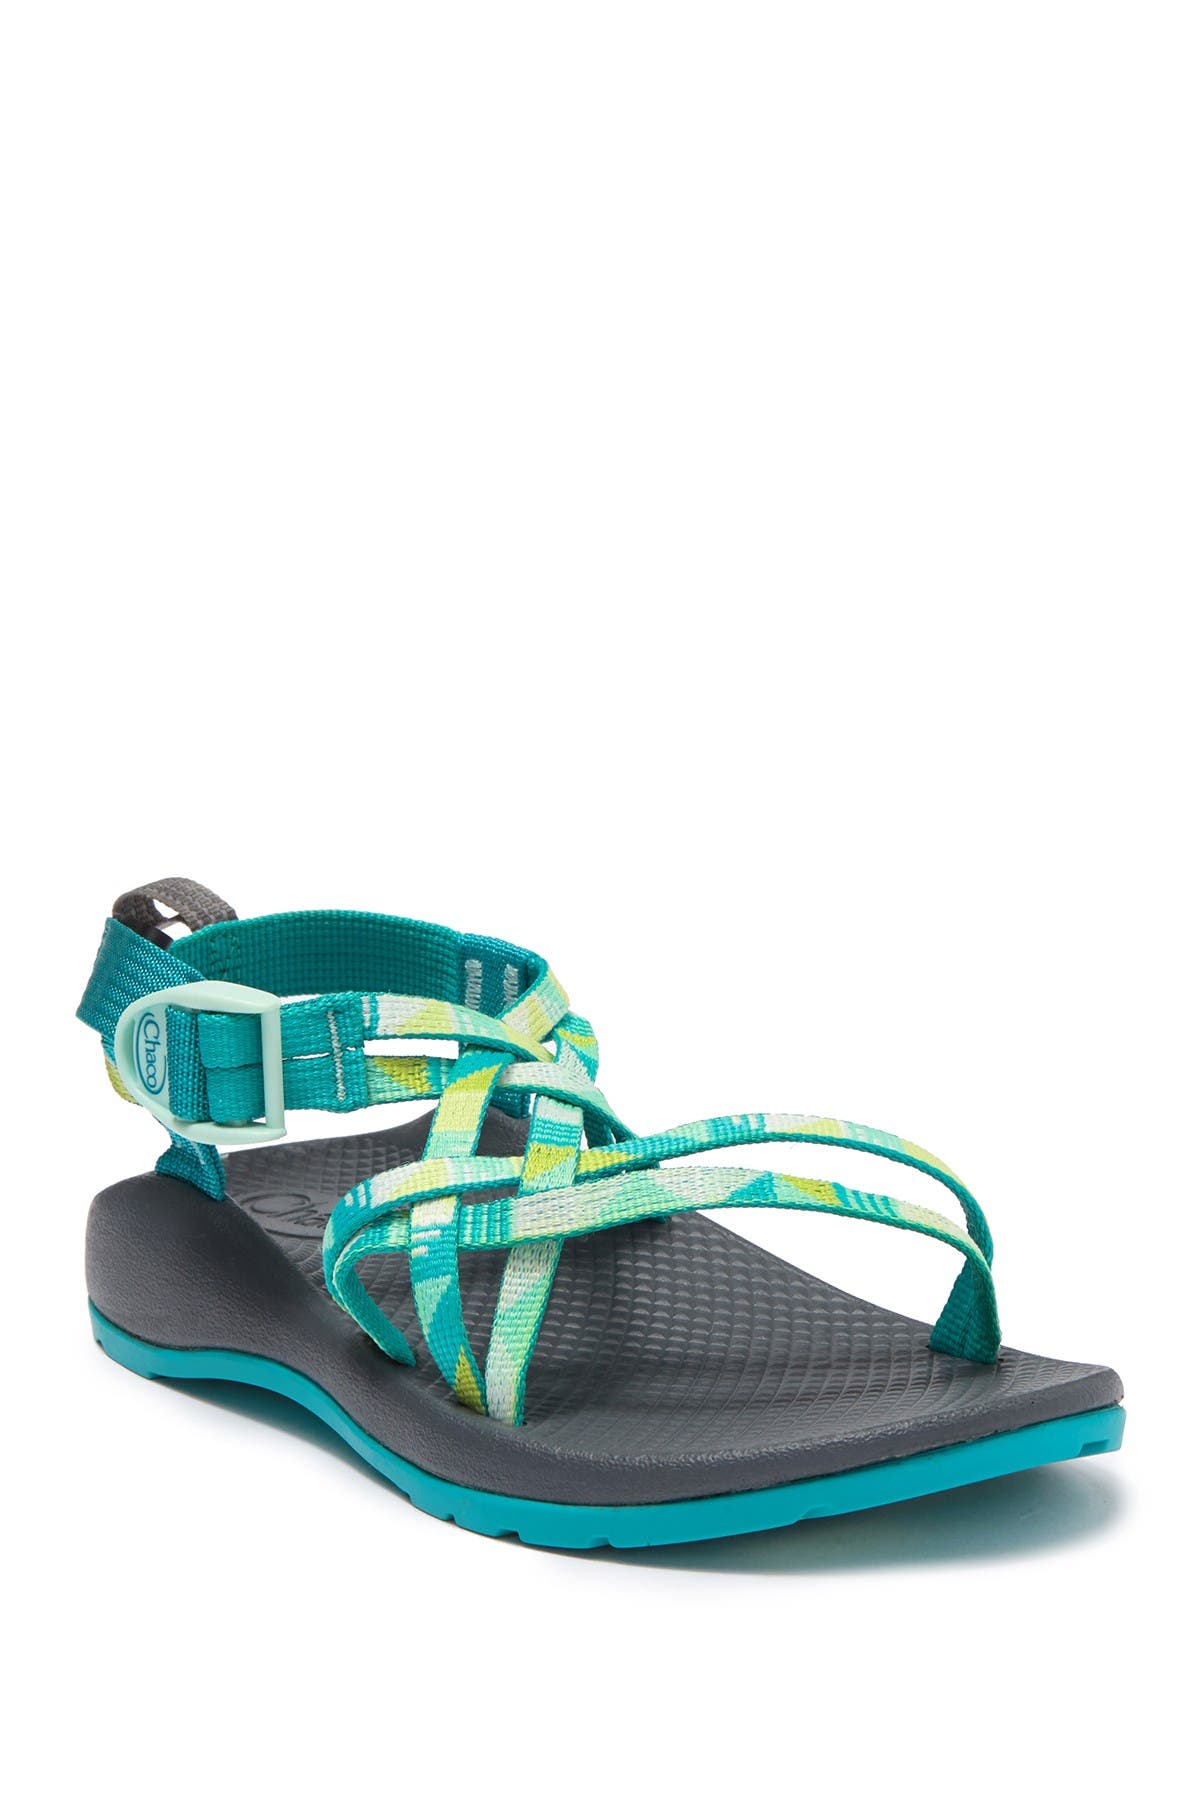 buy chacos near me